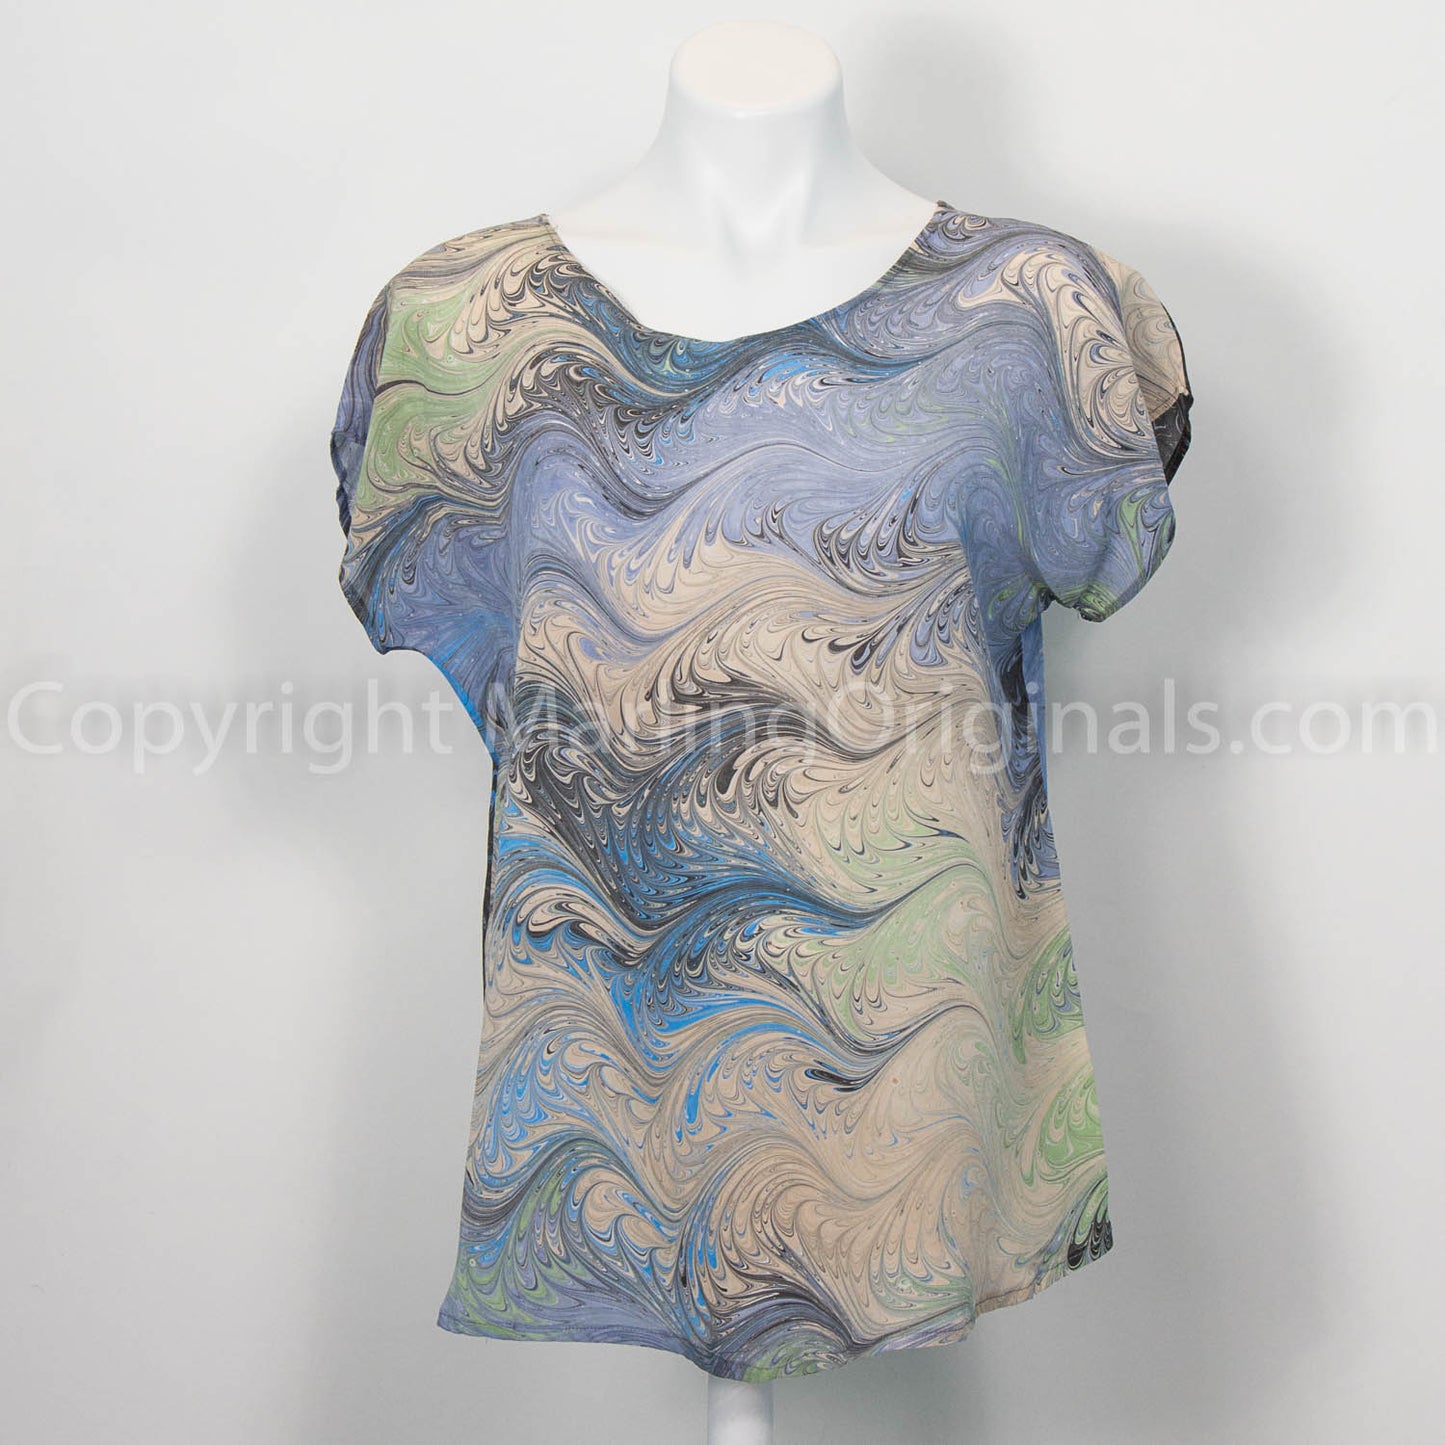 Silk top marbled in soft gray & sand with blue, black and celery accents.  Short sleeve, round neck